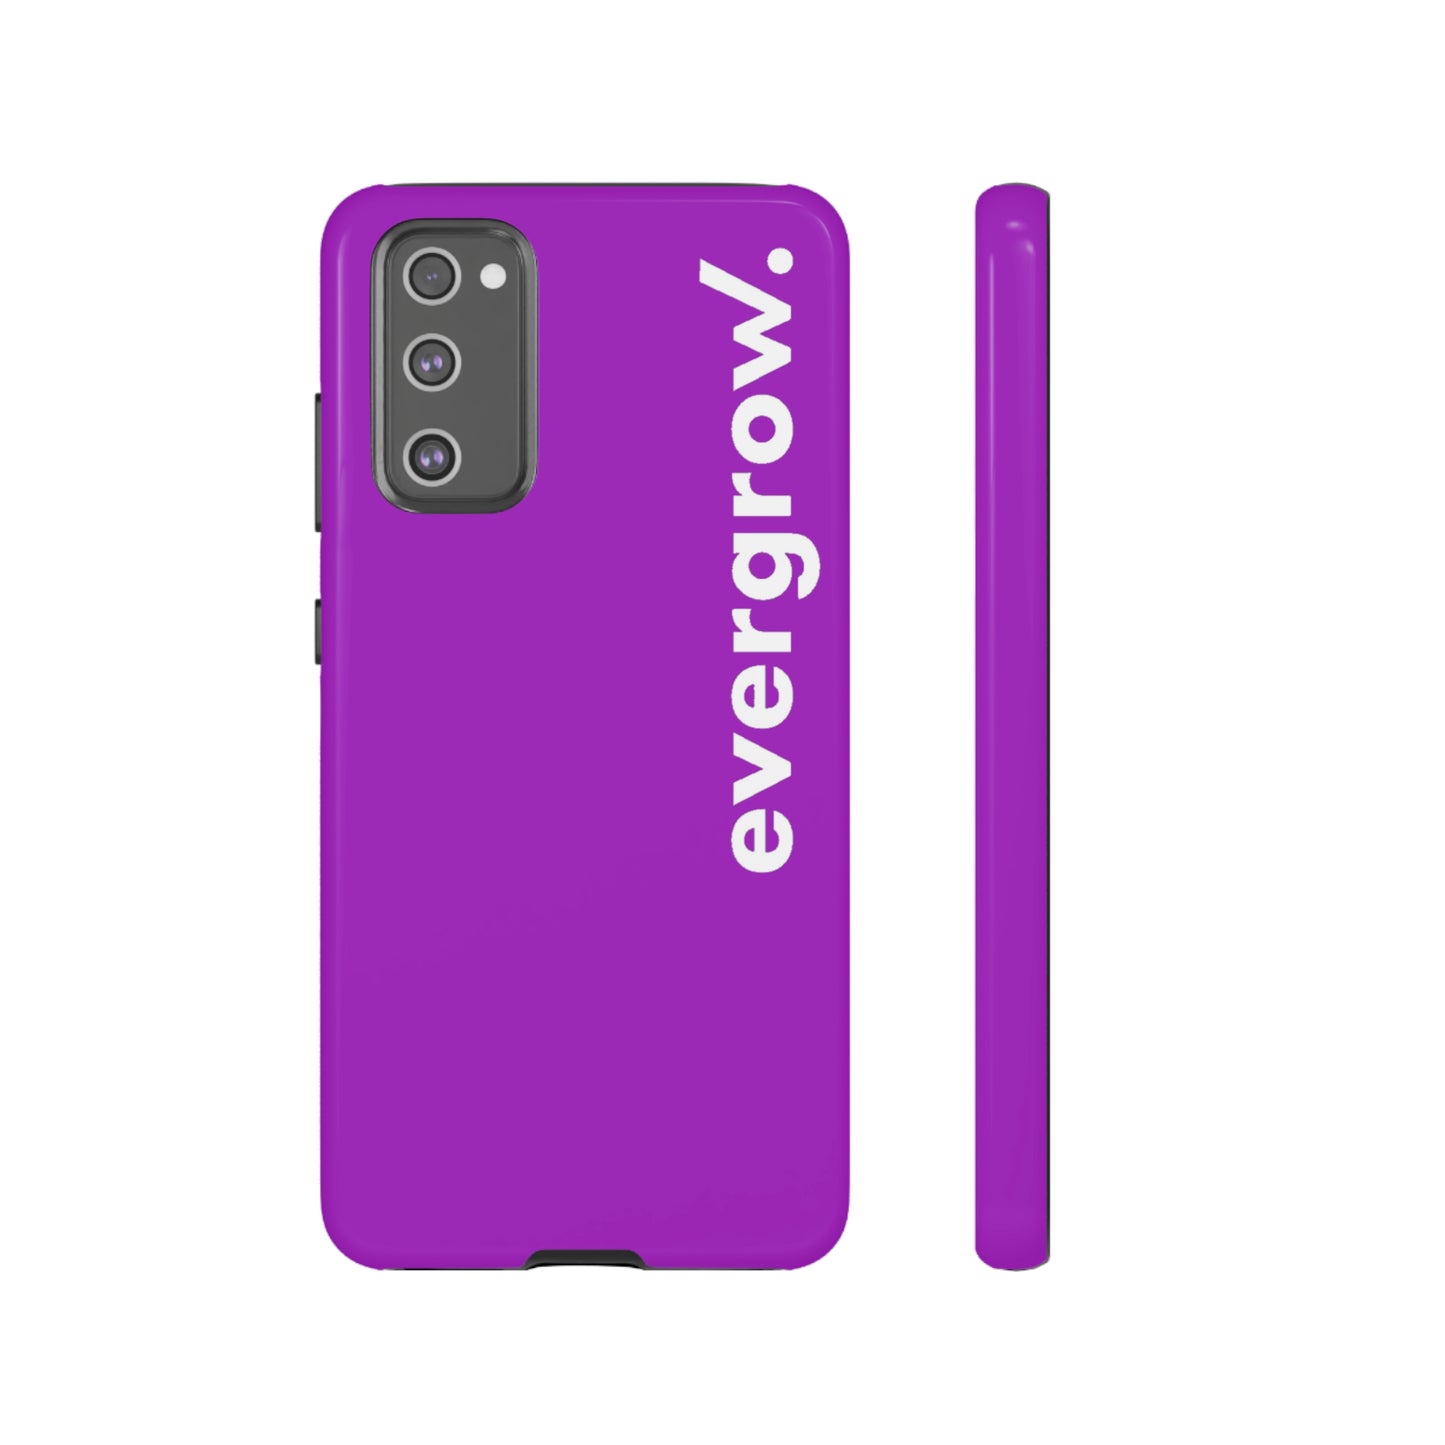 Worldwide - Tough Cases with case in EverGrow purple and white evergrow lettering